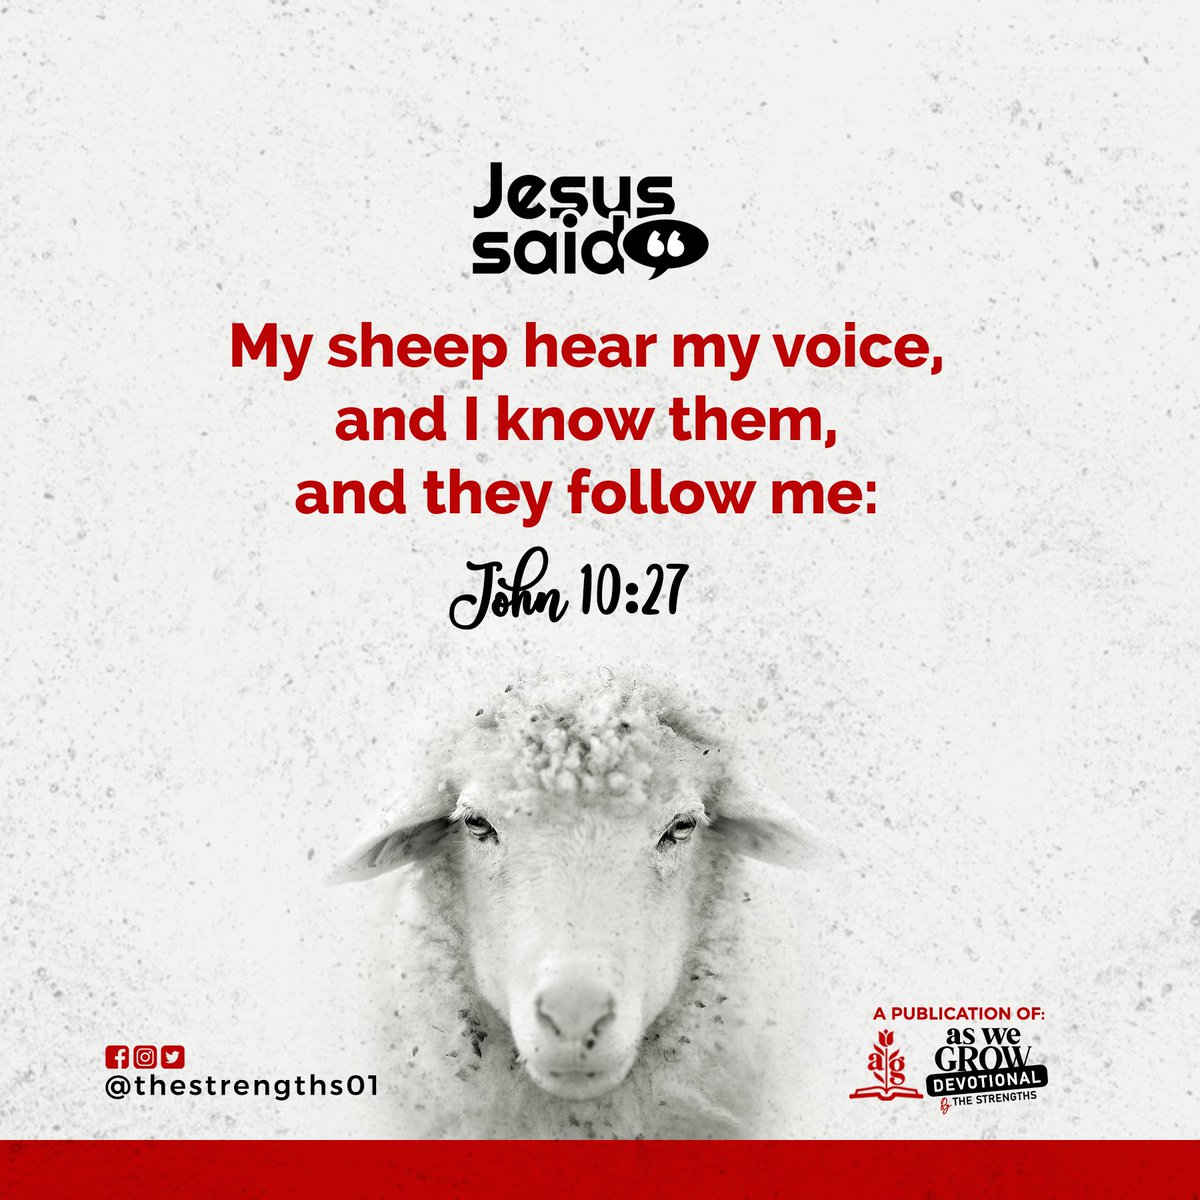 Jesus said: 
Daily Dose of the Words of Christ, everyday in February.

DAY 1

John 10:37
'My sheep hear my voice, and I know them, and they follow me:

Love from @thestrengths01

#JesusSaid #goodShepherd #TheStrengths #theLordismyshepherd #aswegrowdevotional #aswegrow

1.